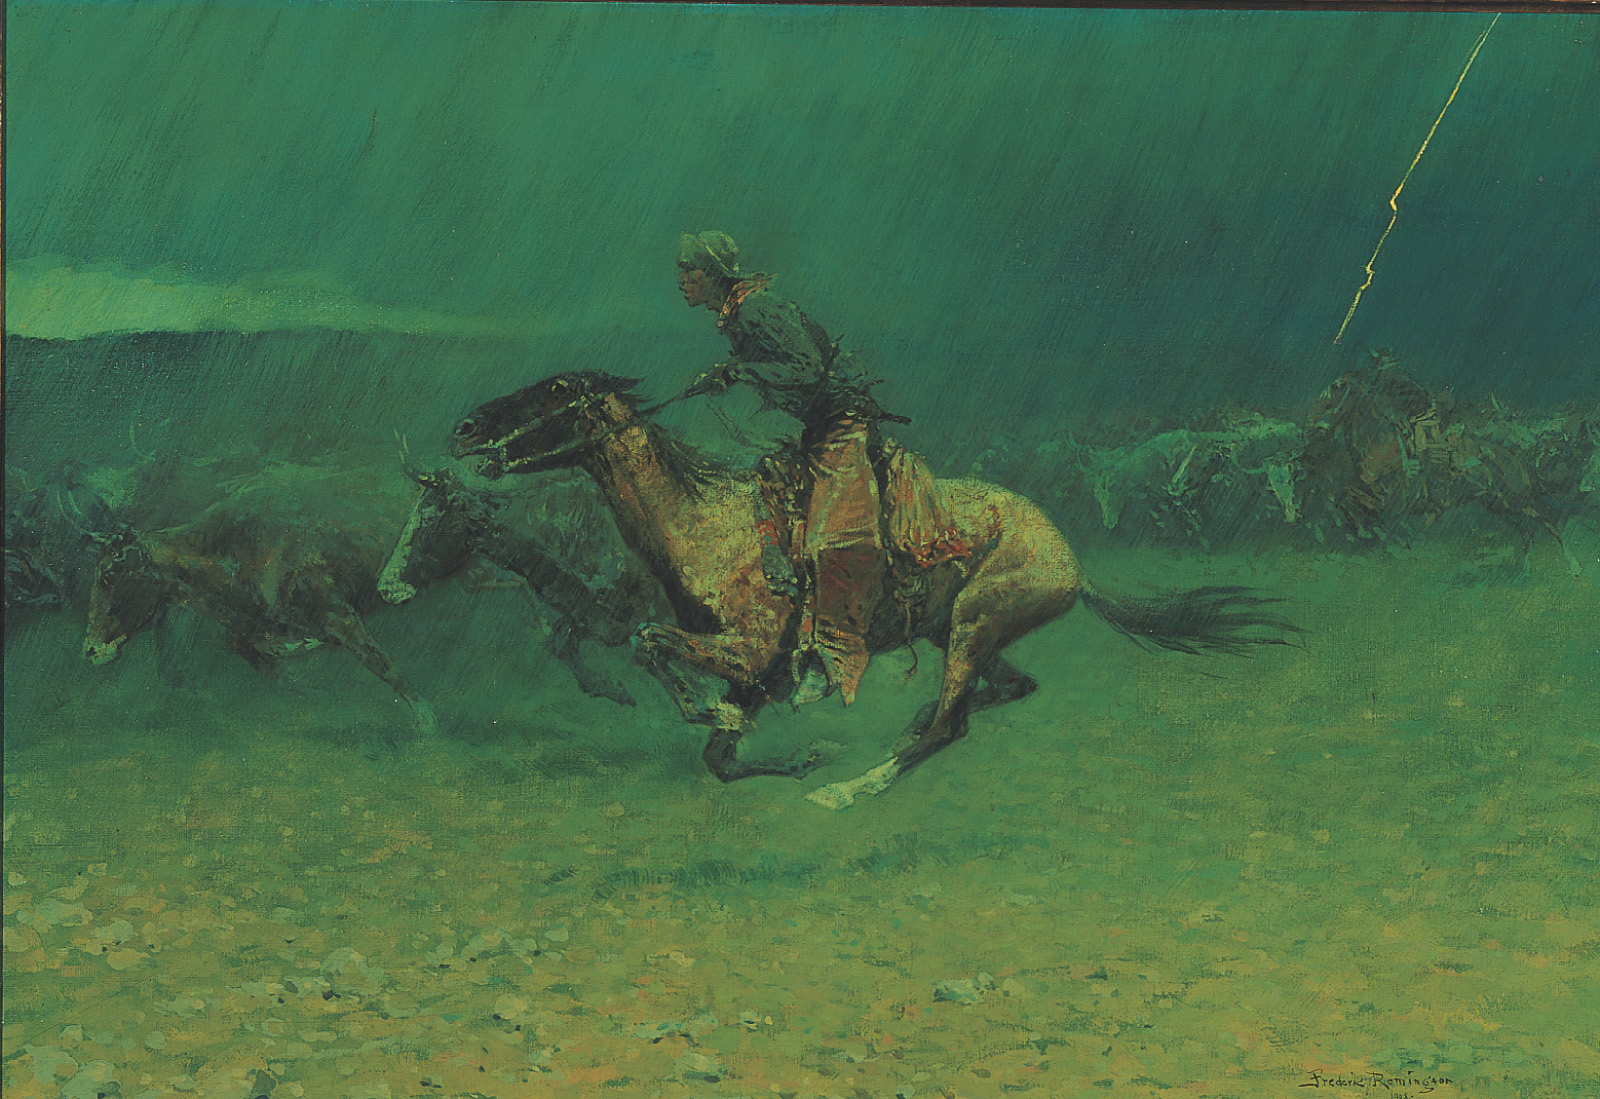 A painting: a cowboy rides a charging horse through a rainstorm, driving a herd of cattle. A lightning bolt strikes nearby.